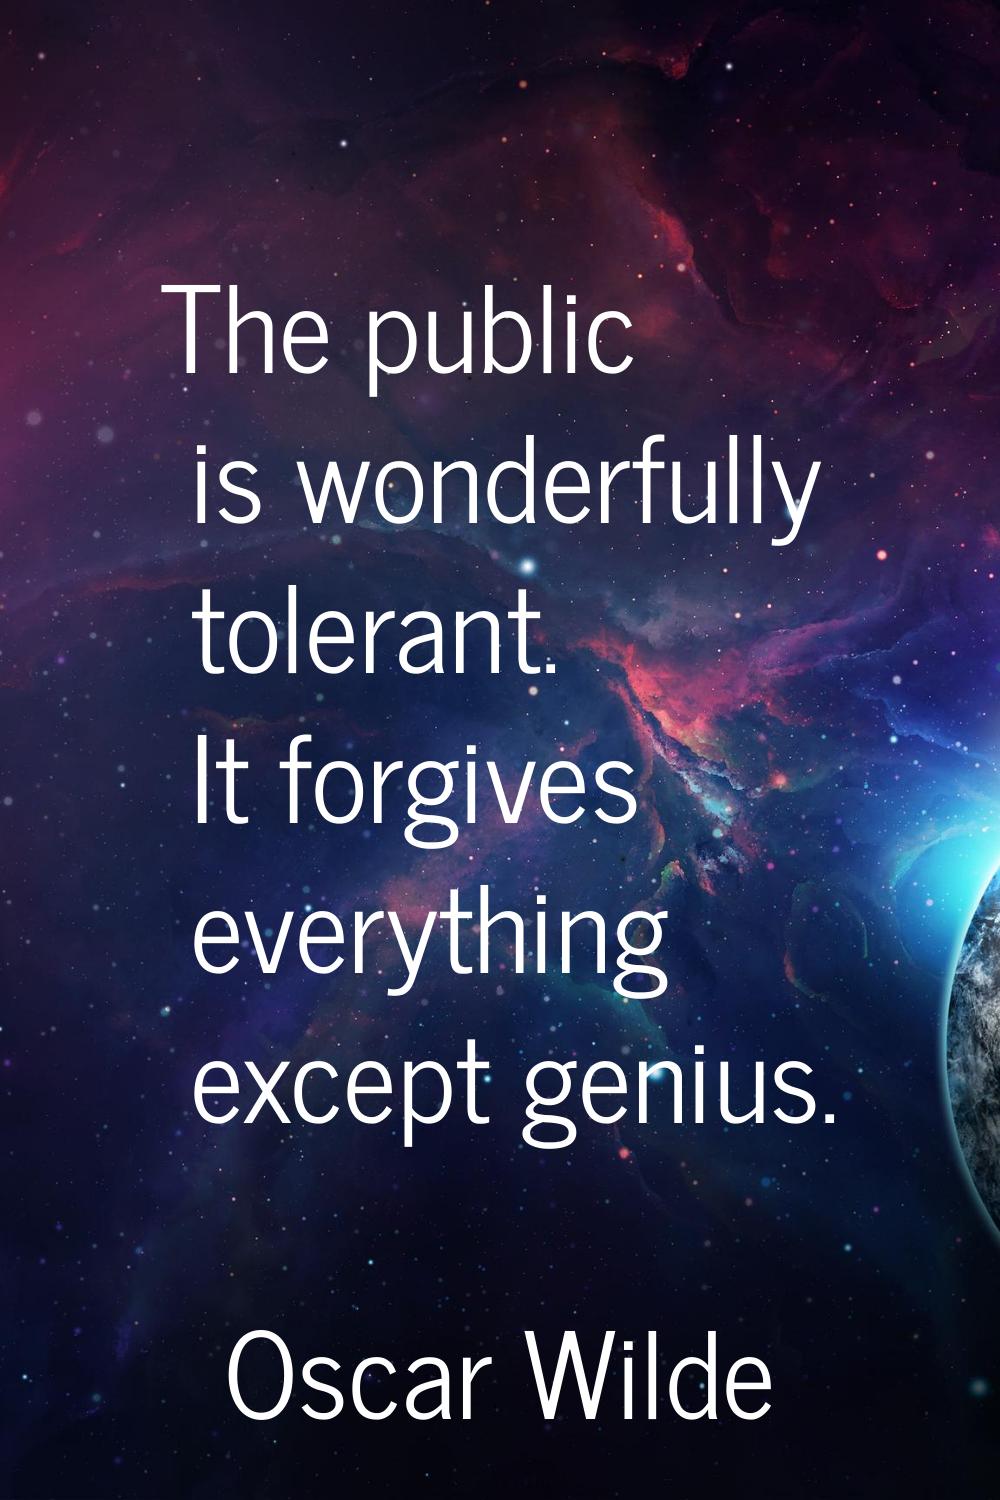 The public is wonderfully tolerant. It forgives everything except genius.